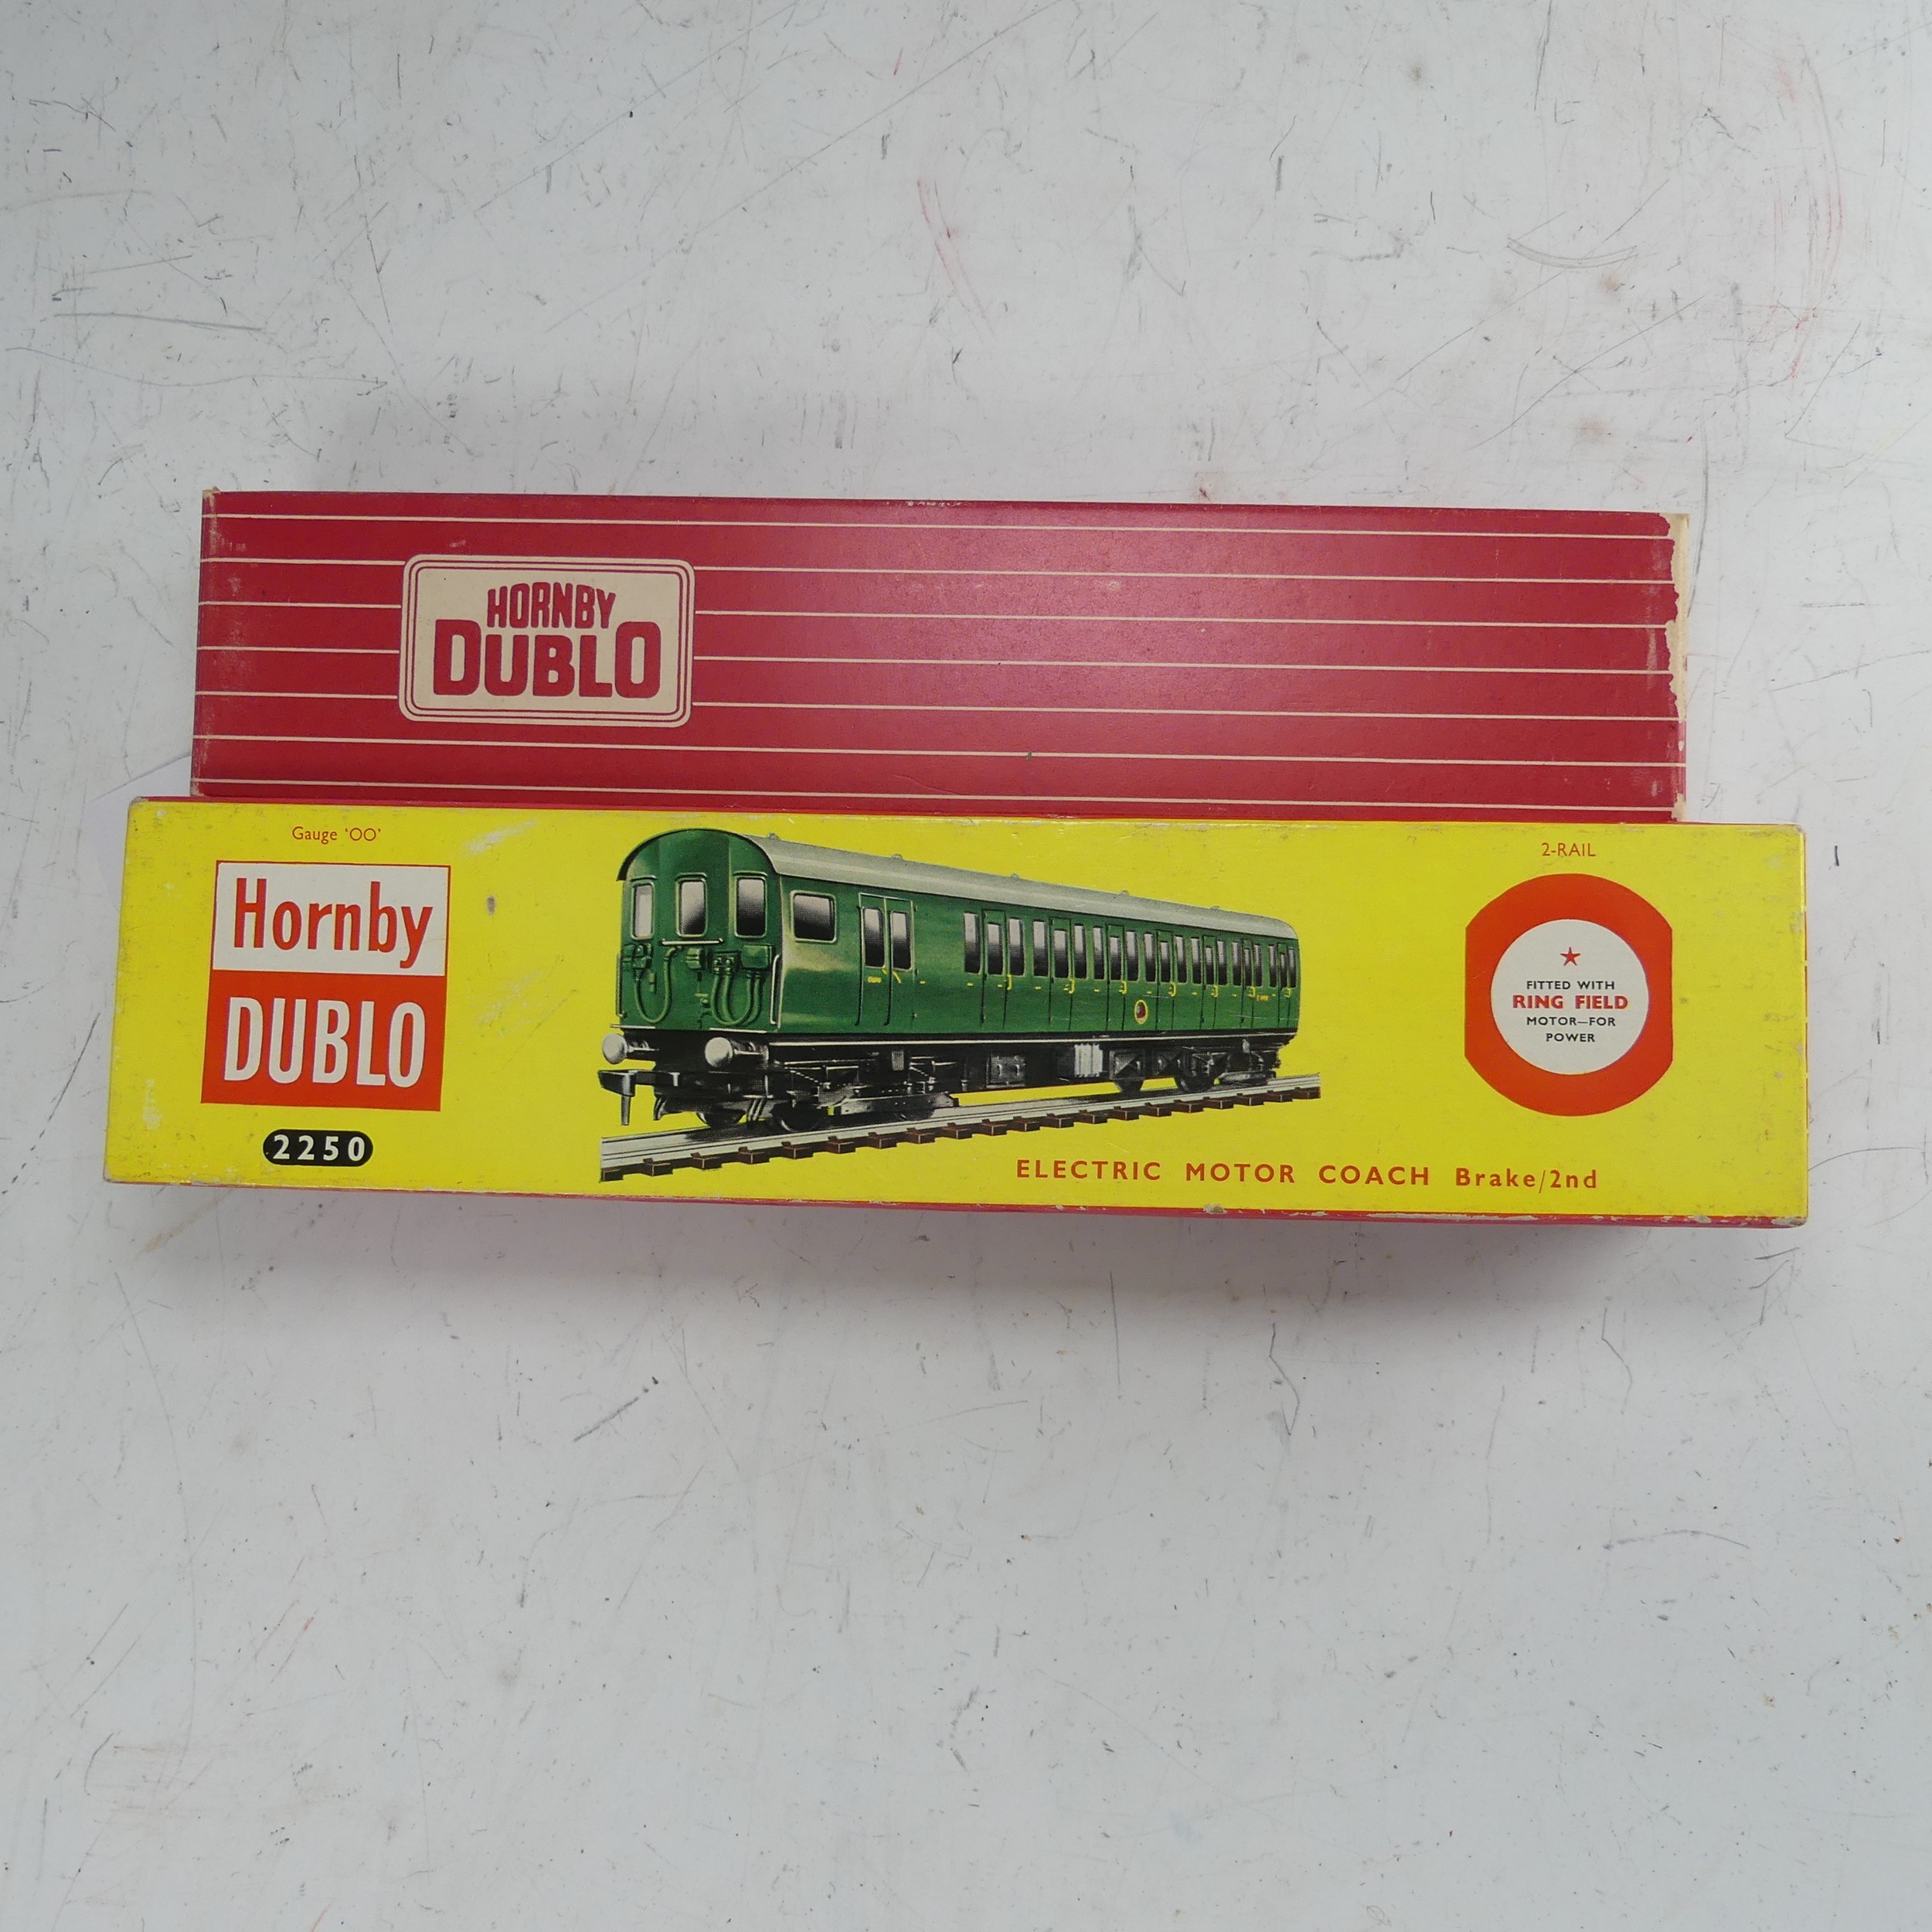 Hornby Dublo: 2250 2-Rail Electric Motor Coach, Brake/2nd No.S.65326, S.R. green, boxed with